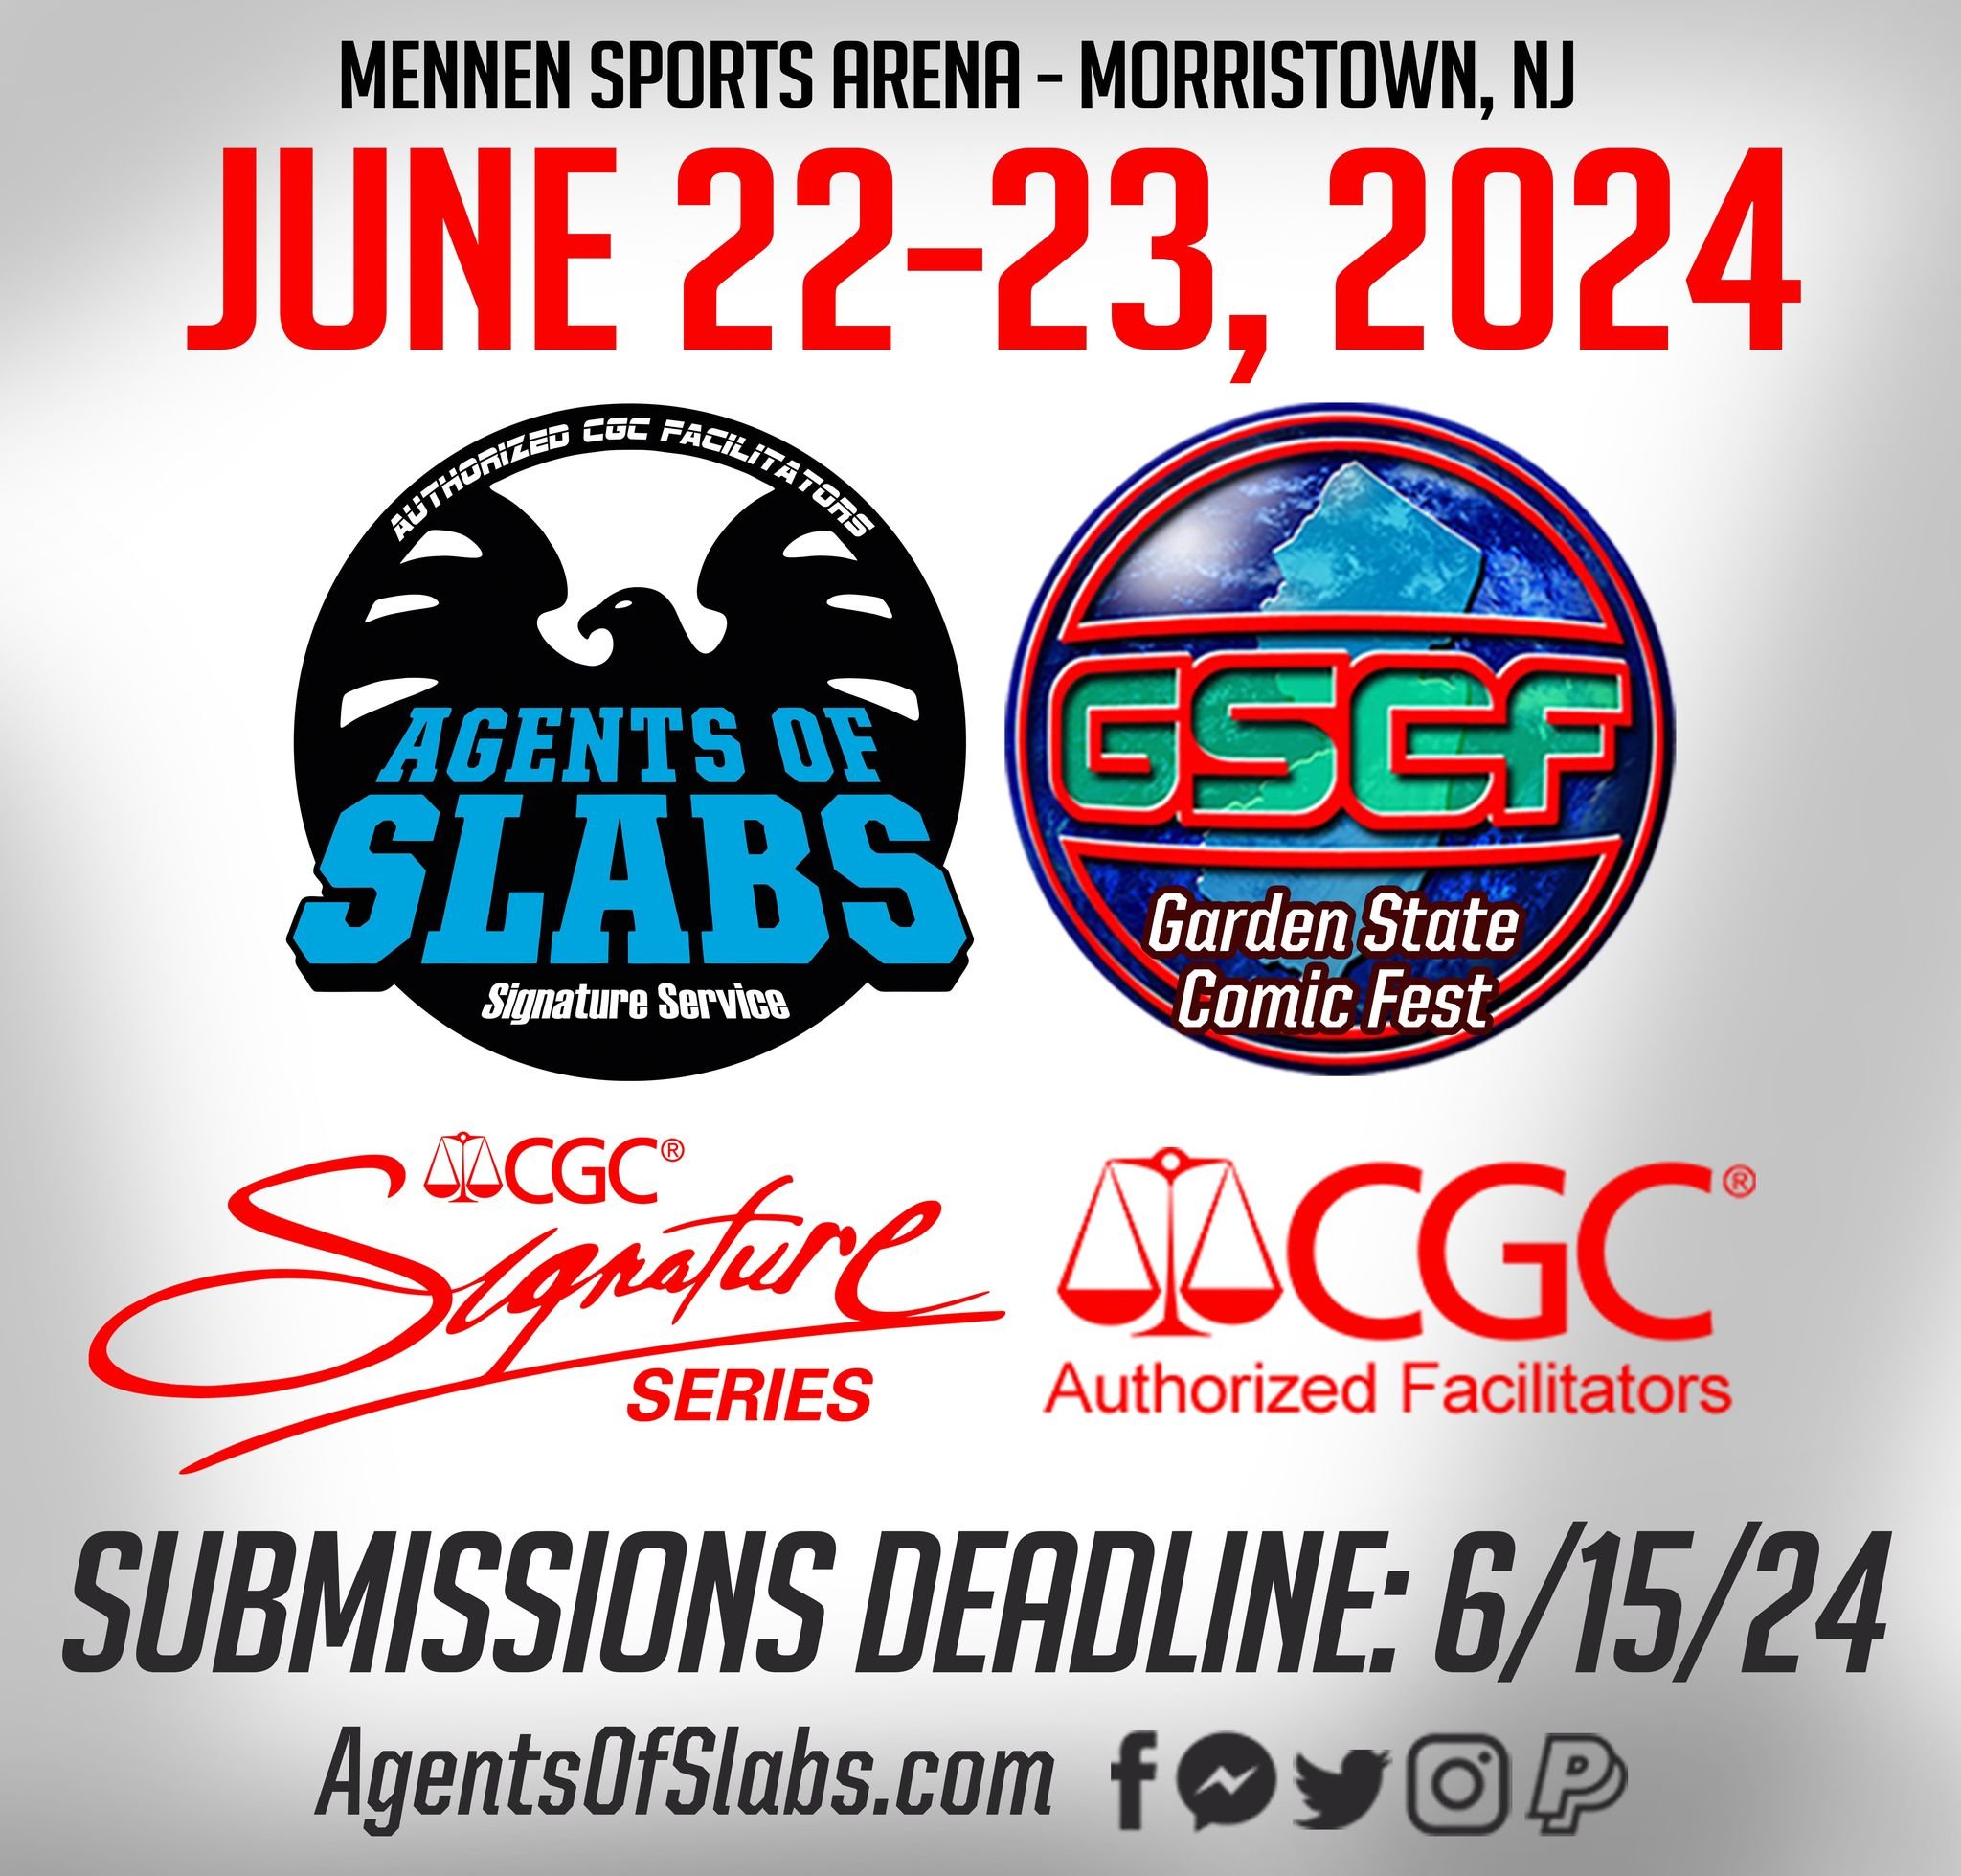 Big Announcement Number 3!
The Agents of Slabs team is coming to the Garden State! We are proud to be the exclusive CGC on-site facilitator for Garden State Comic Fest '24! We are taking mail-in submissions for this event as well. Deadline for mail-i